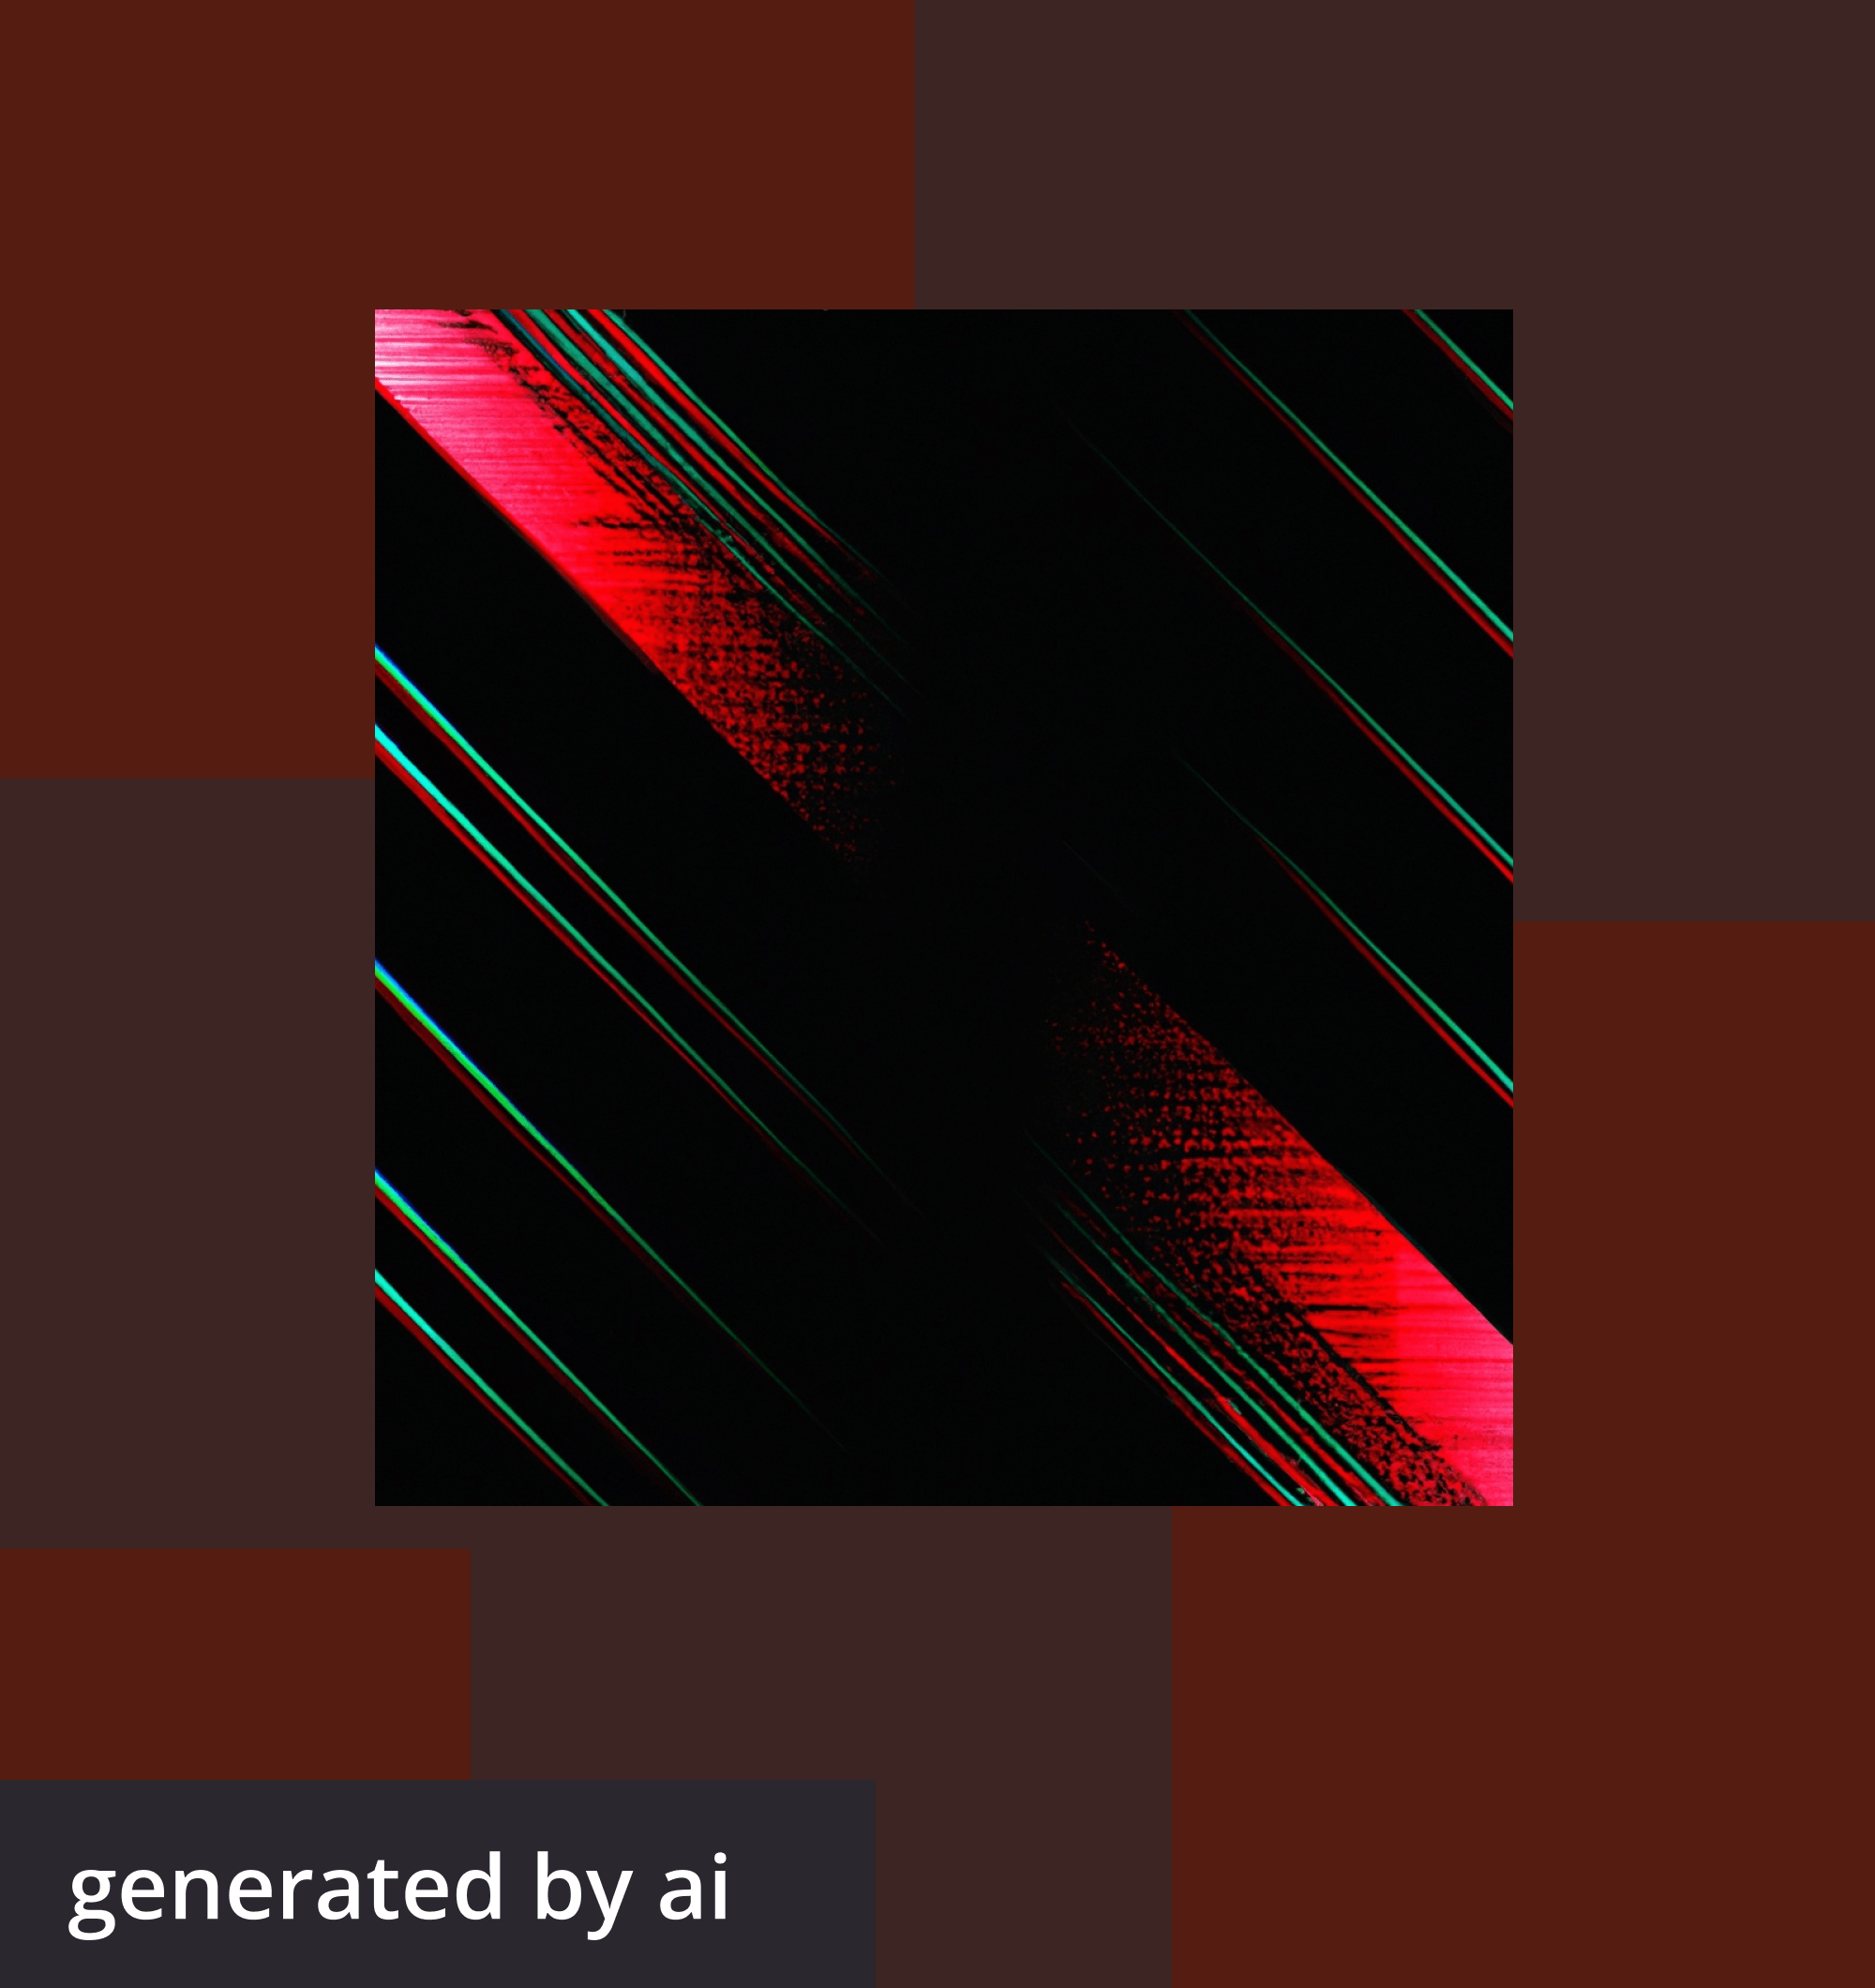 An AI-generated abstract, futuristic image with green and red lines over a red checkered background